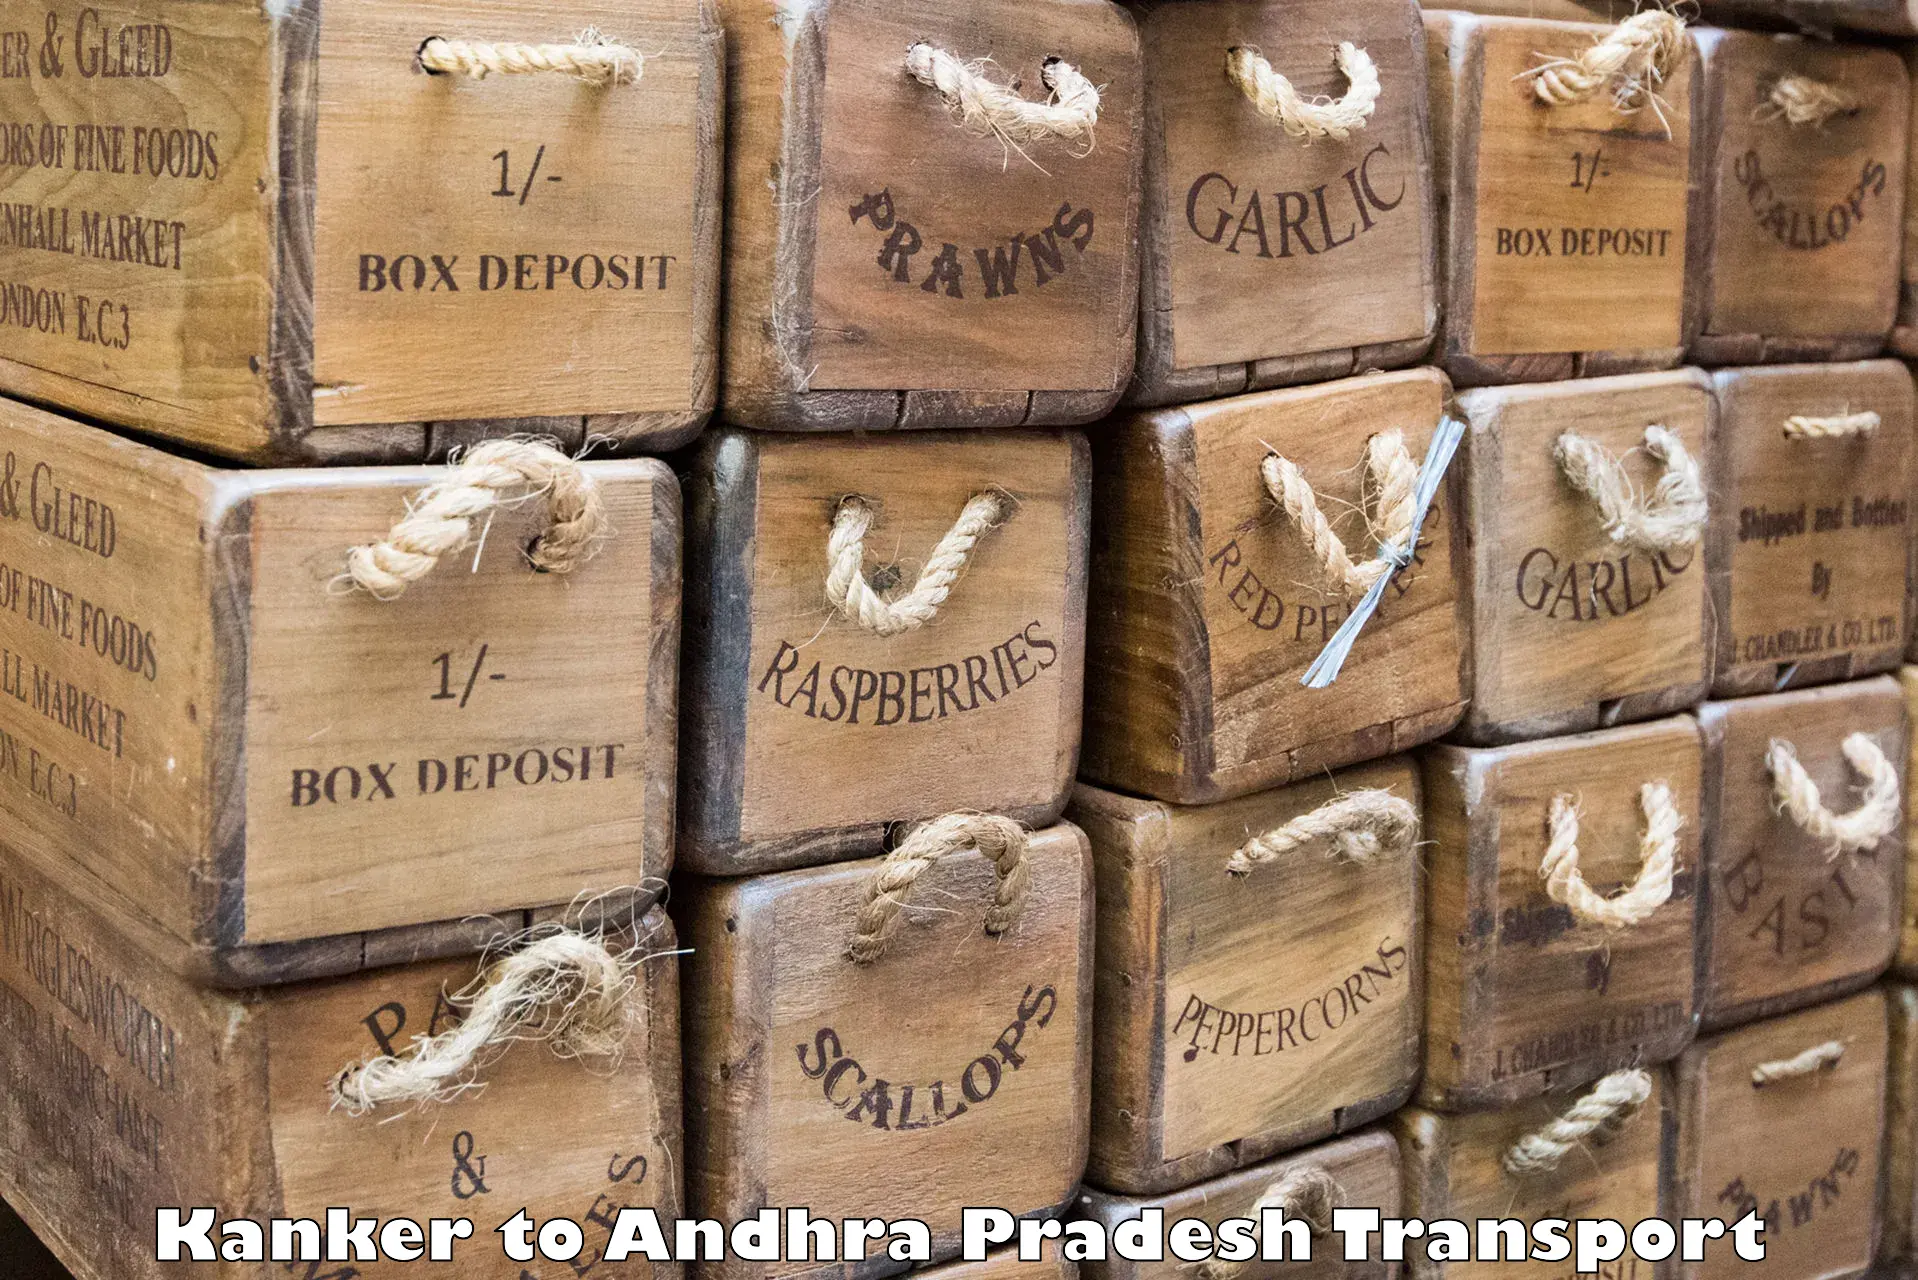 Truck transport companies in India Kanker to Dhone